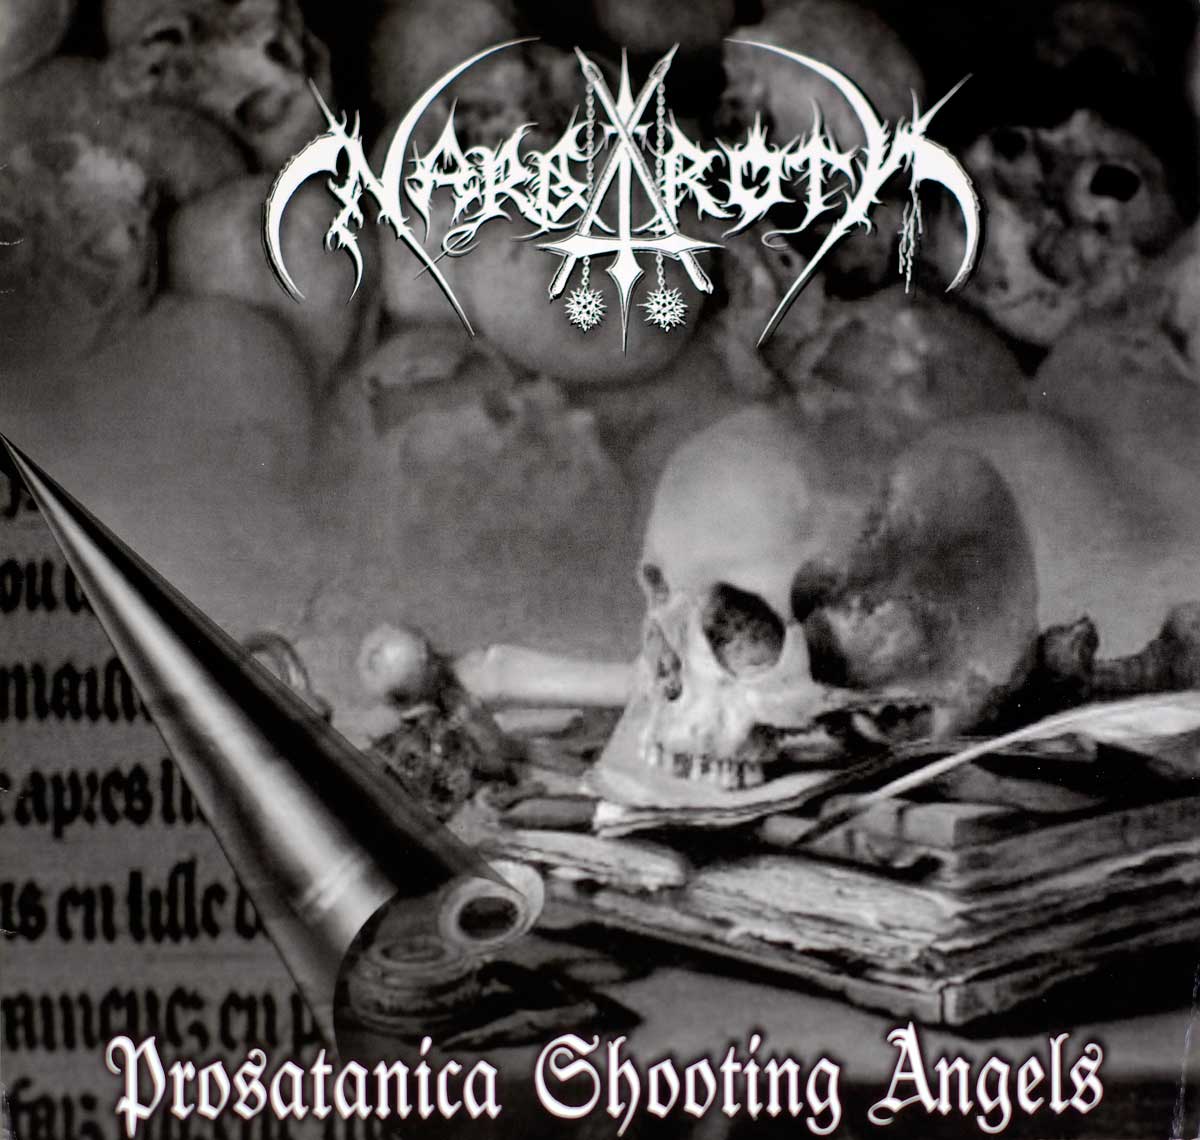 High Quality Photo of Album Front Cover  "NARGAROTH - Prosatanica Shooting Angels"